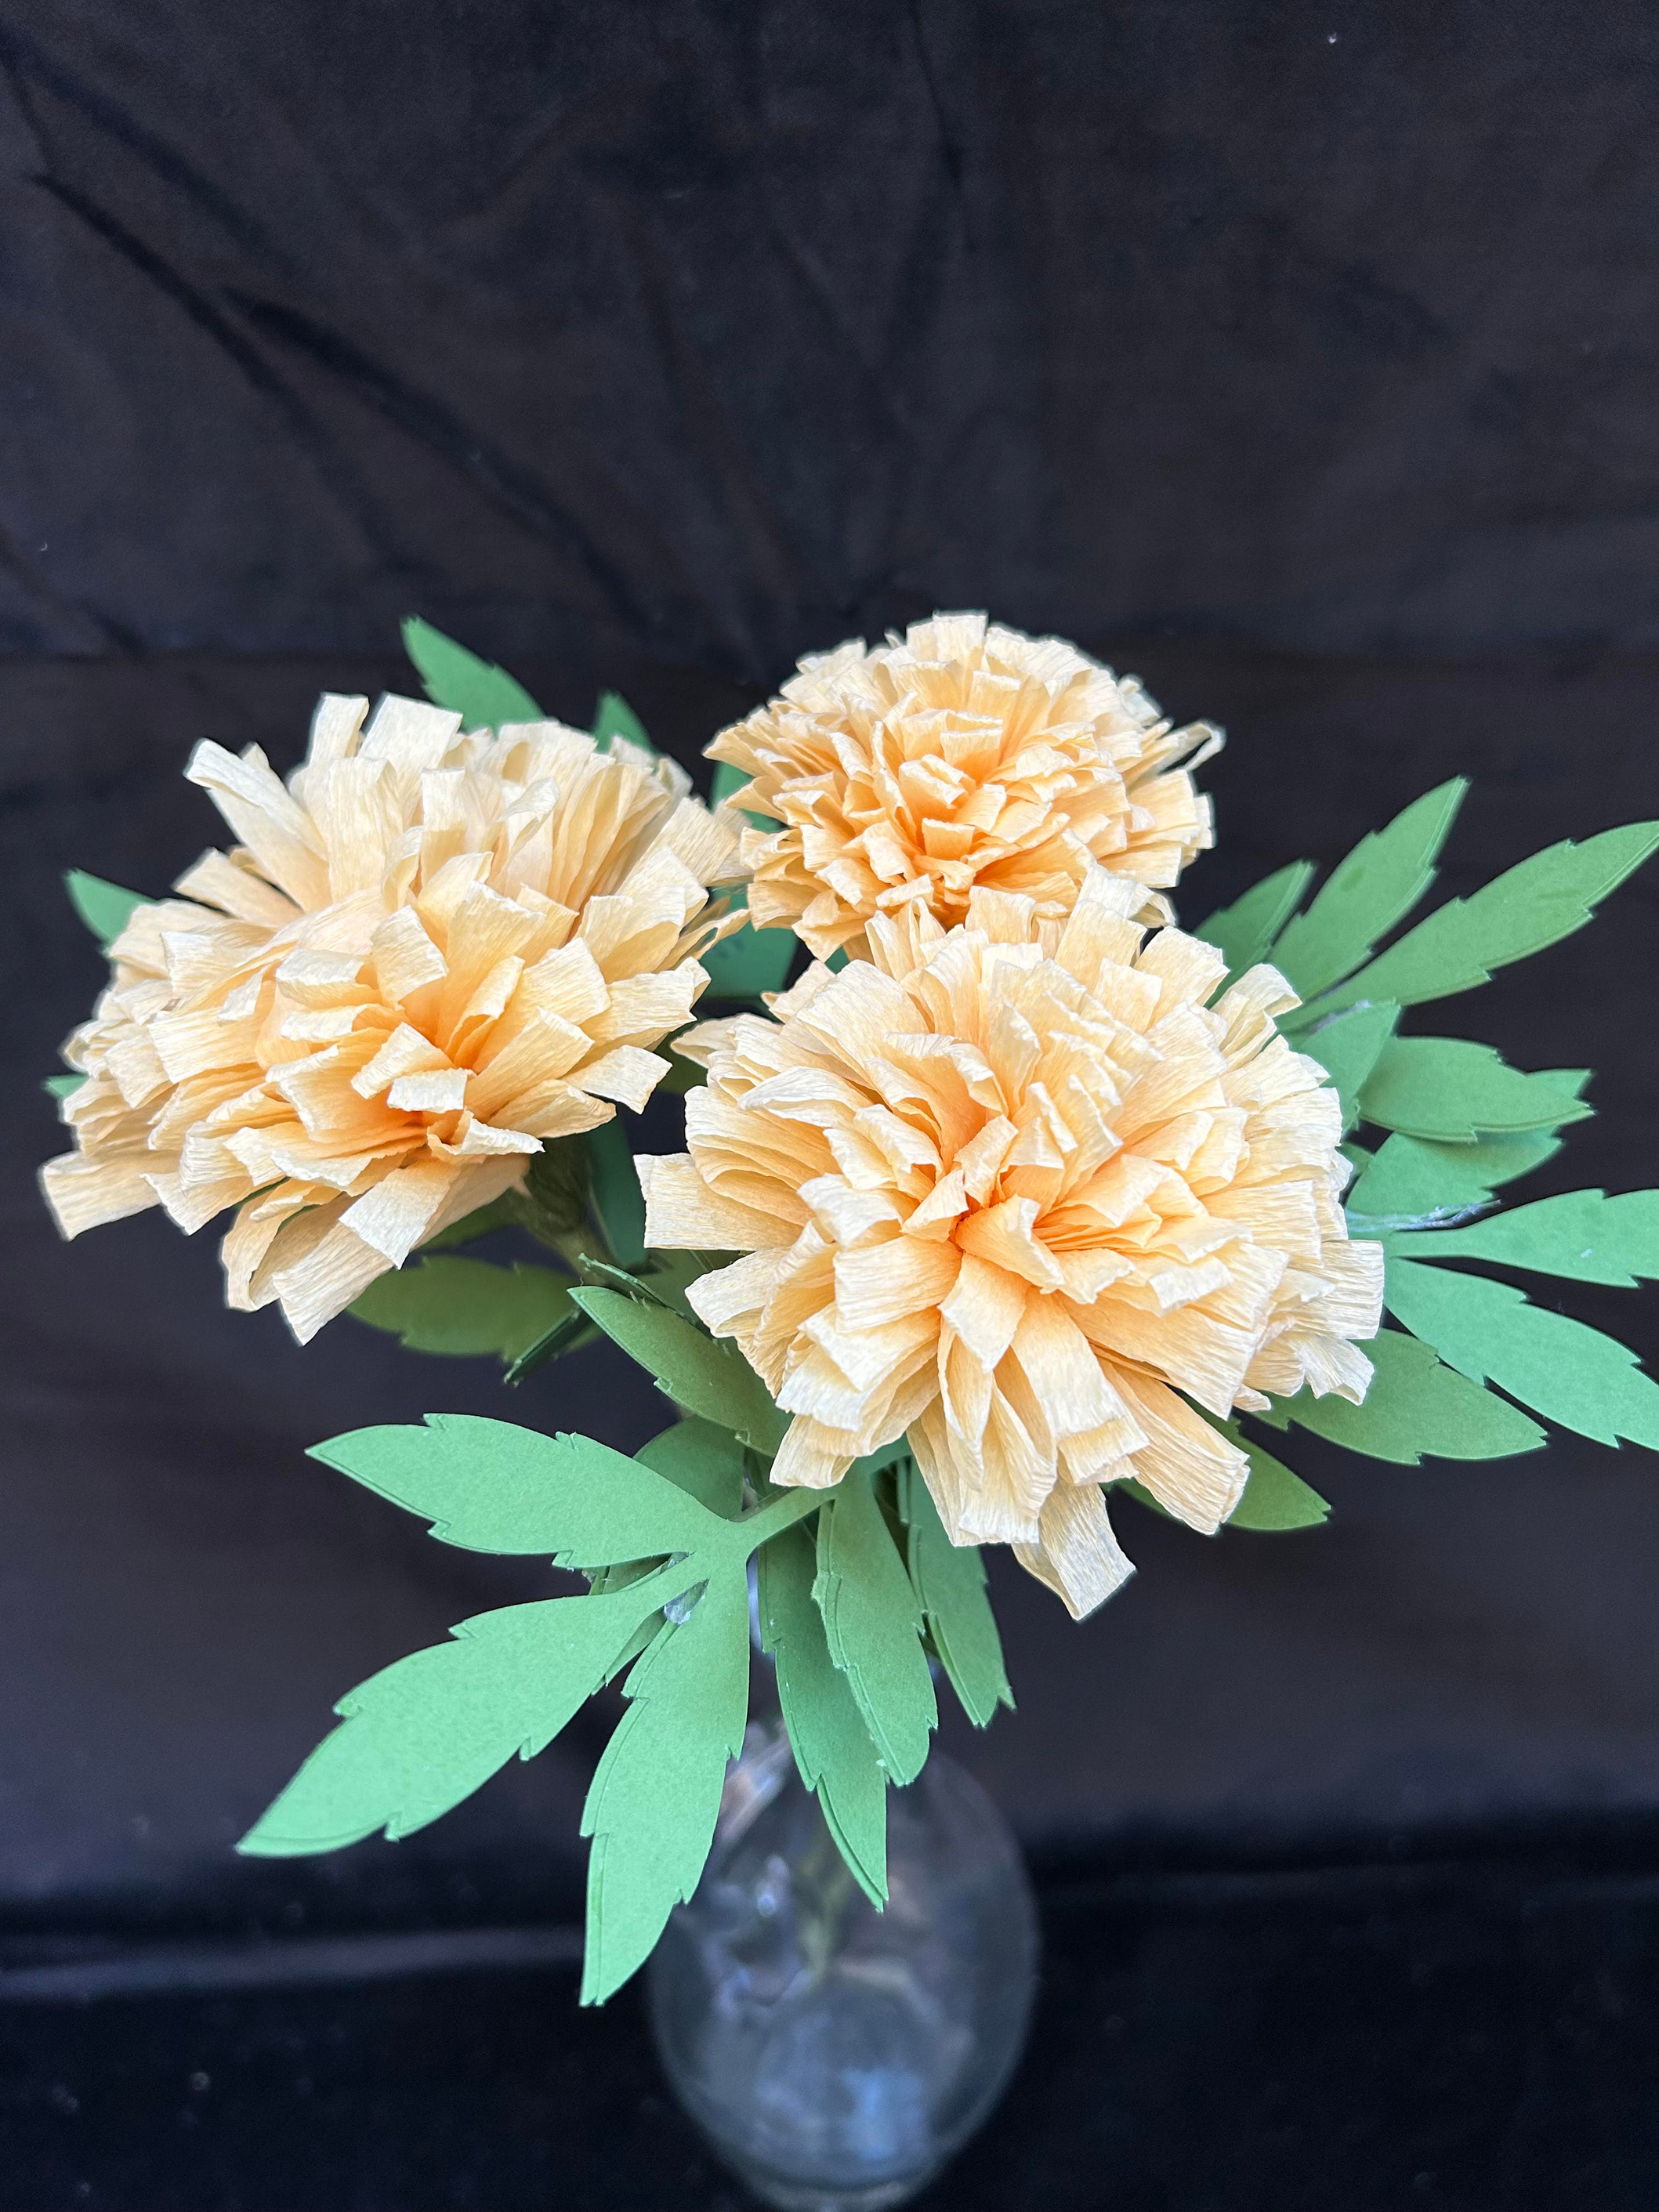 Image of the craft featuring marigold plants made from crepe paper.